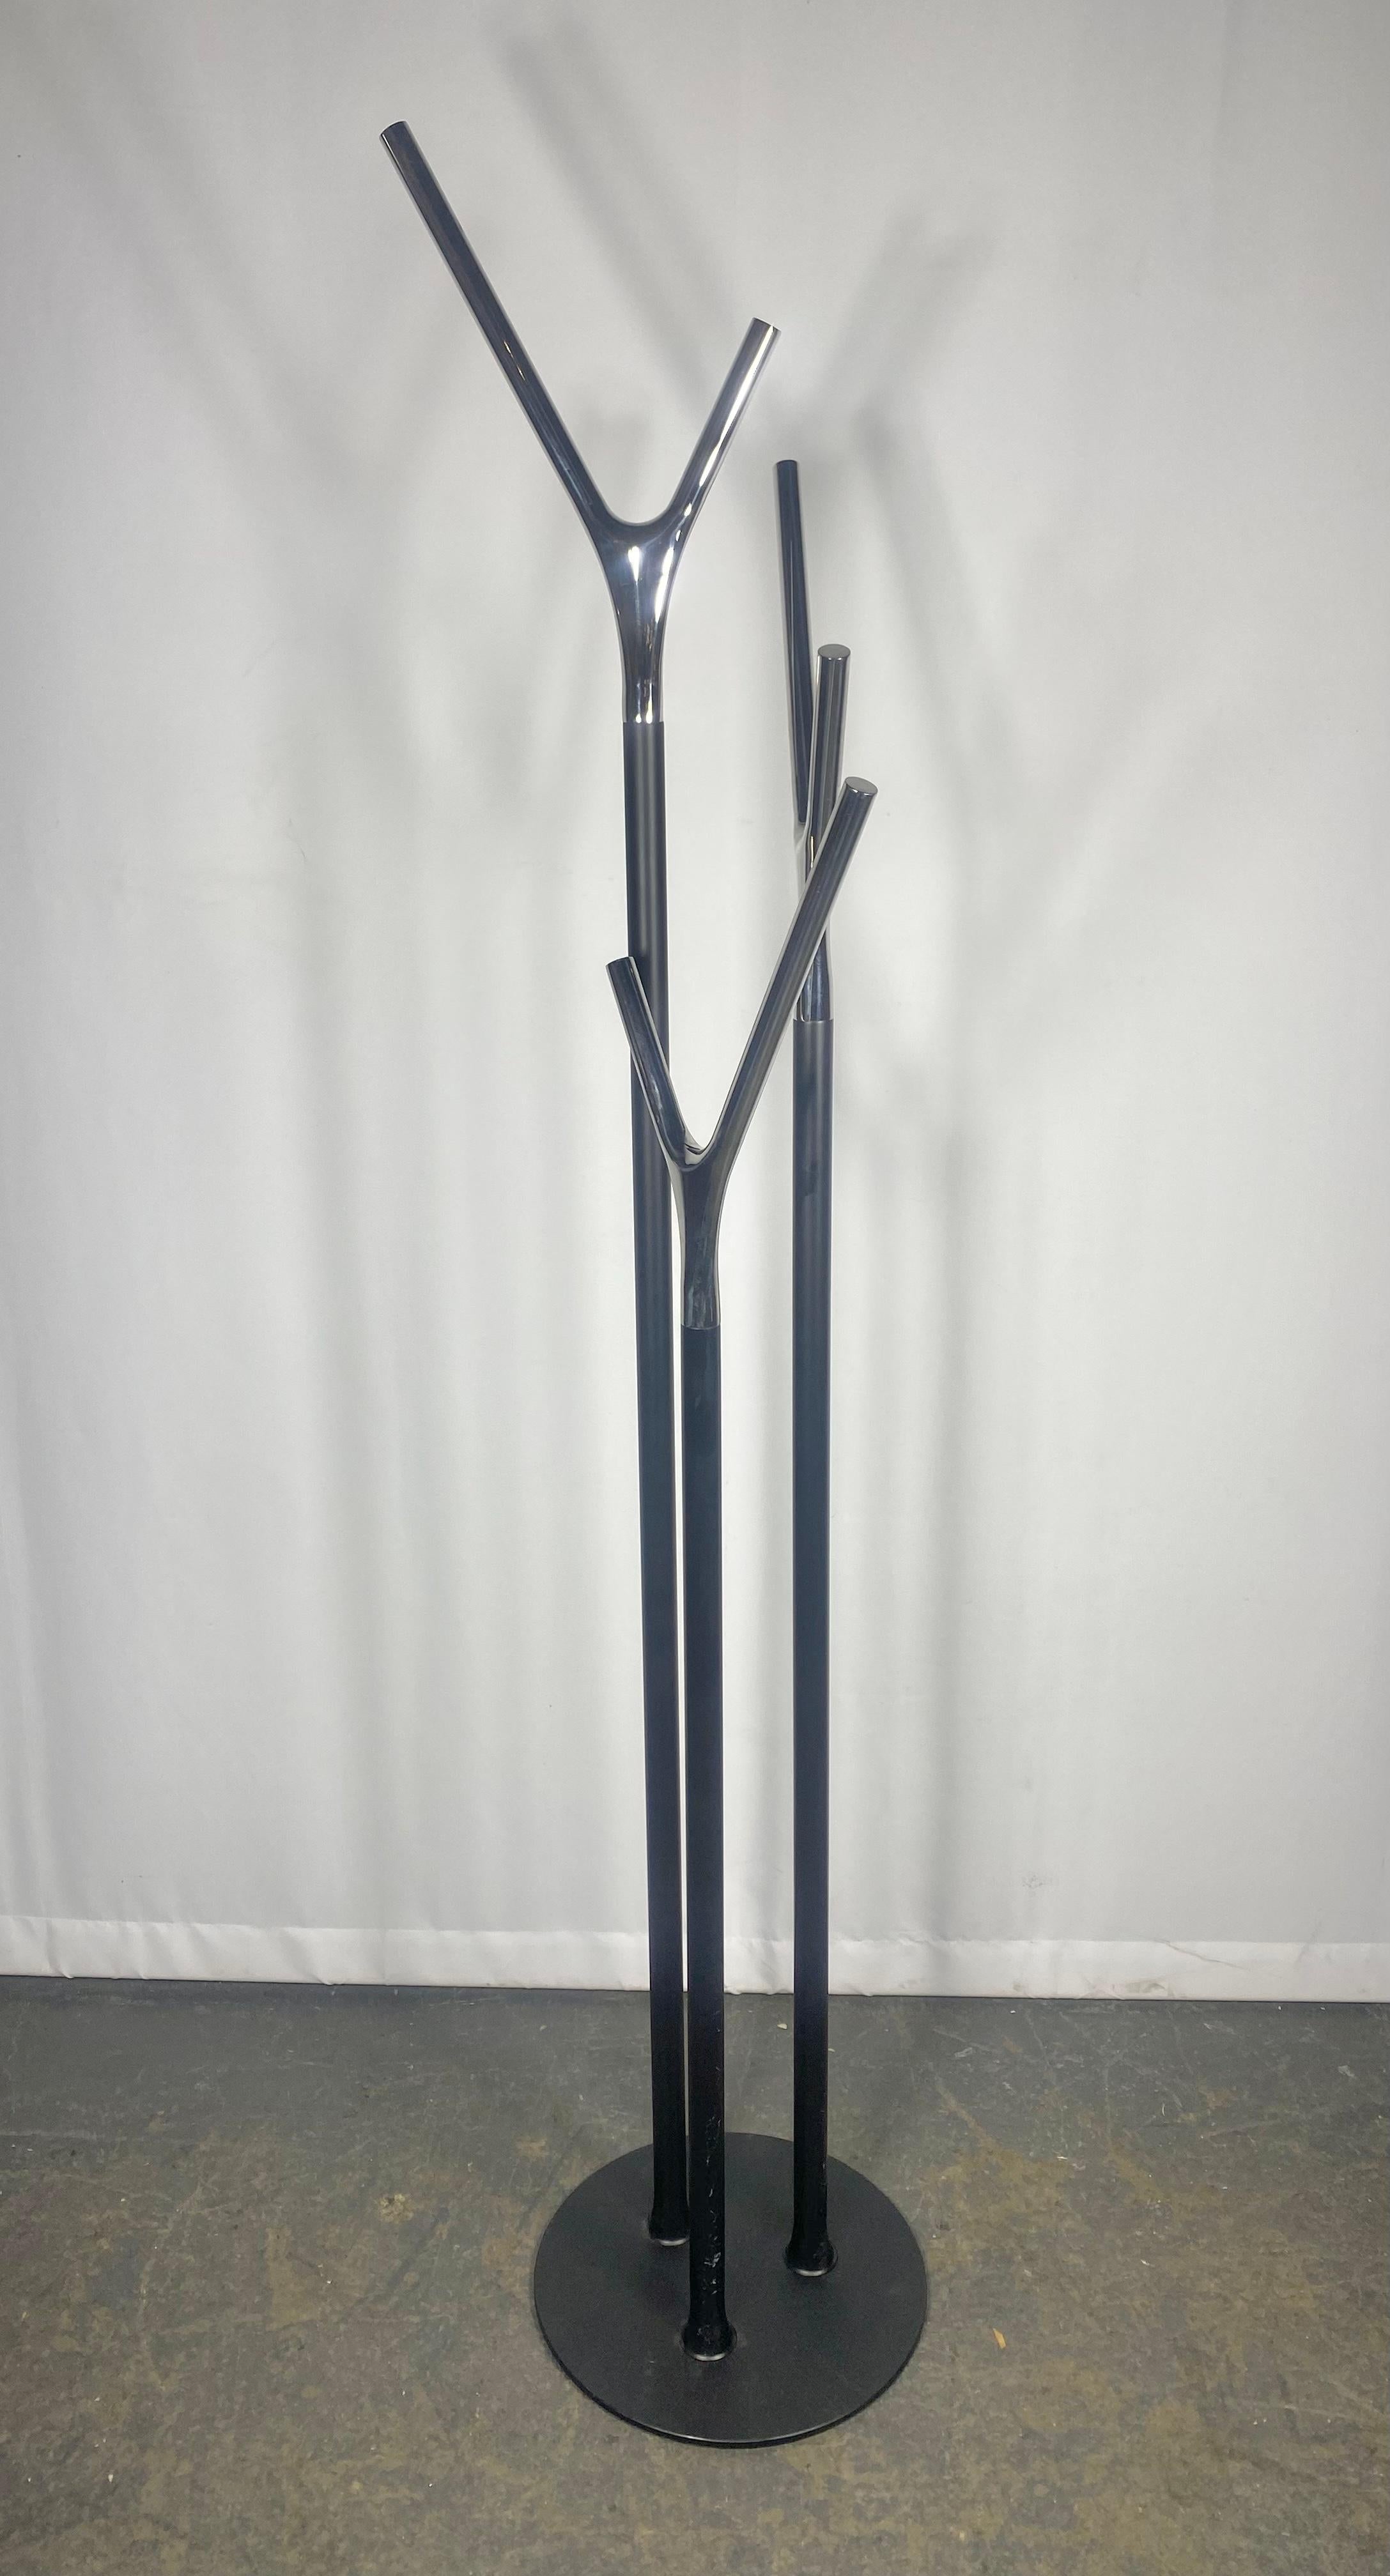 Steel Modernist Contemporary Wishbone Coat Stand - Mirror Chrome by Busk+Hertzog For Sale